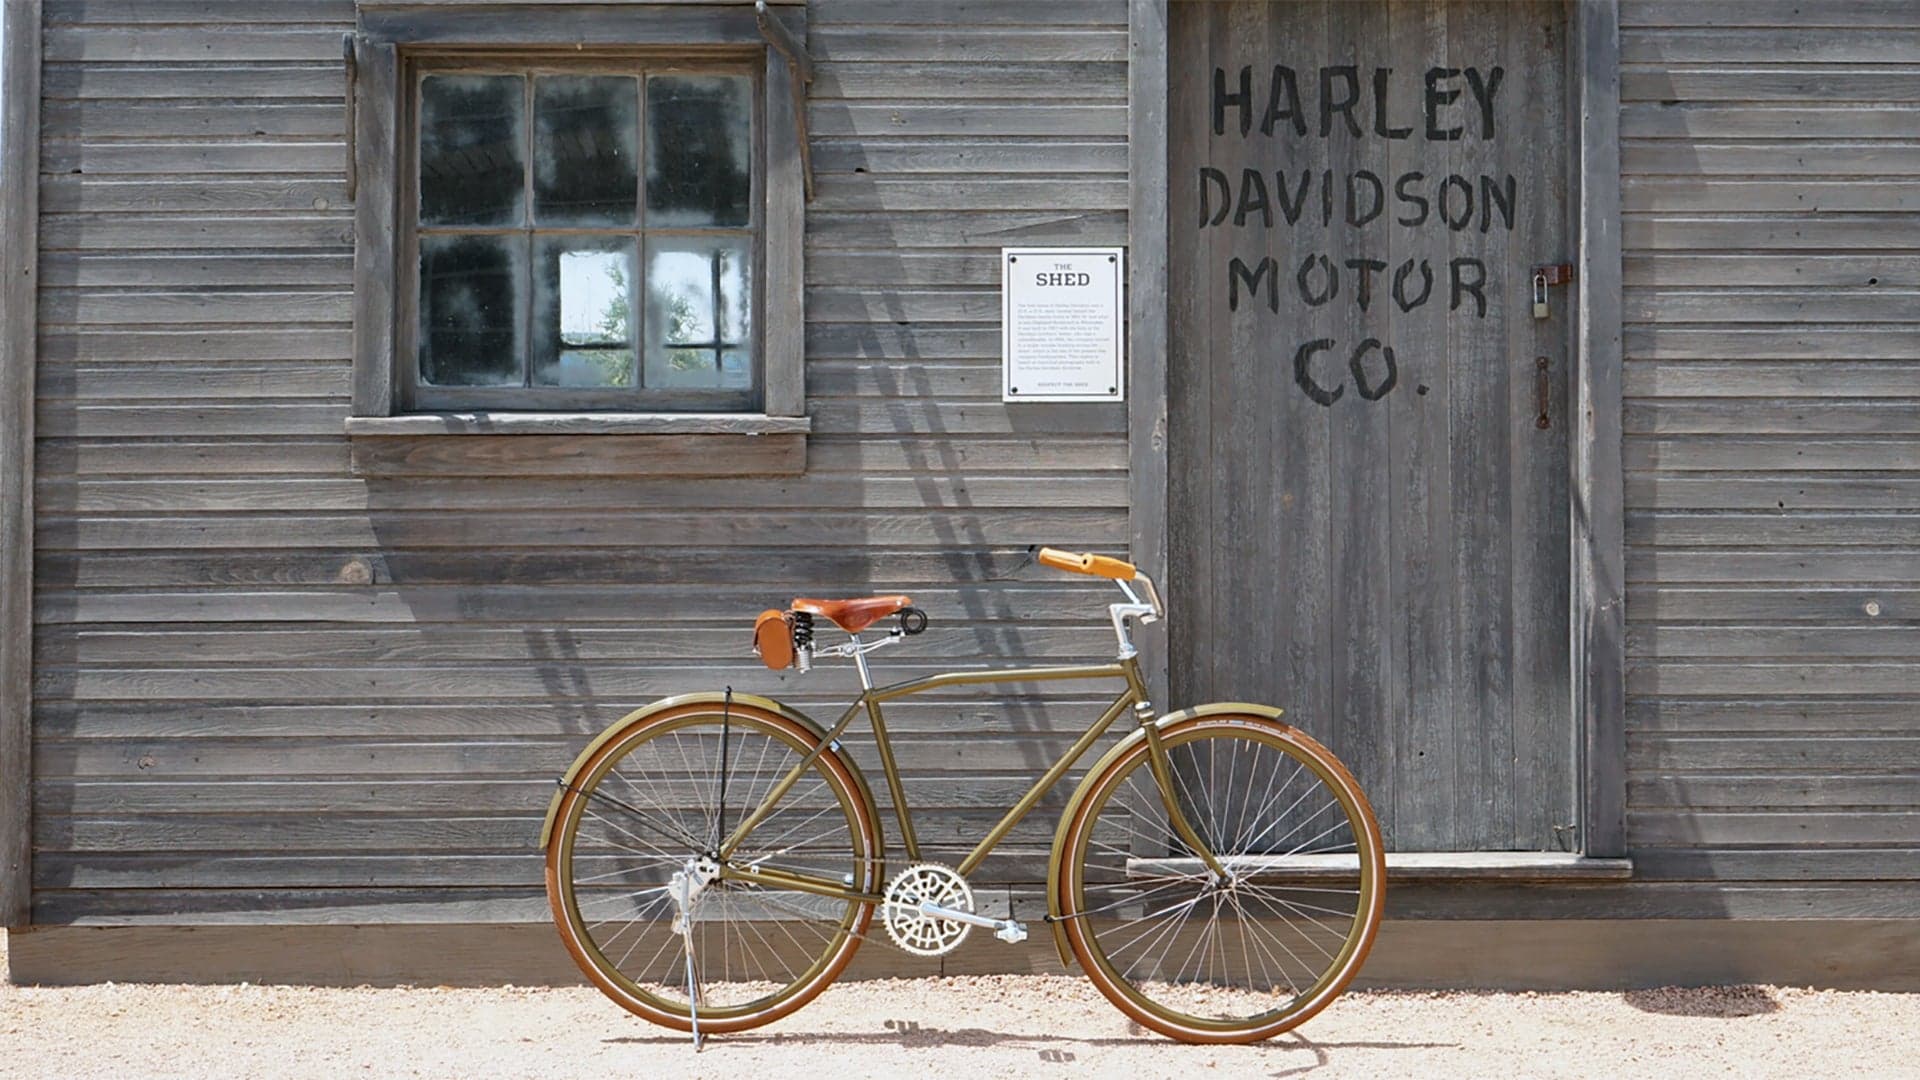 You Can Now Buy a $4,200 Bicycle From Harley-Davidson